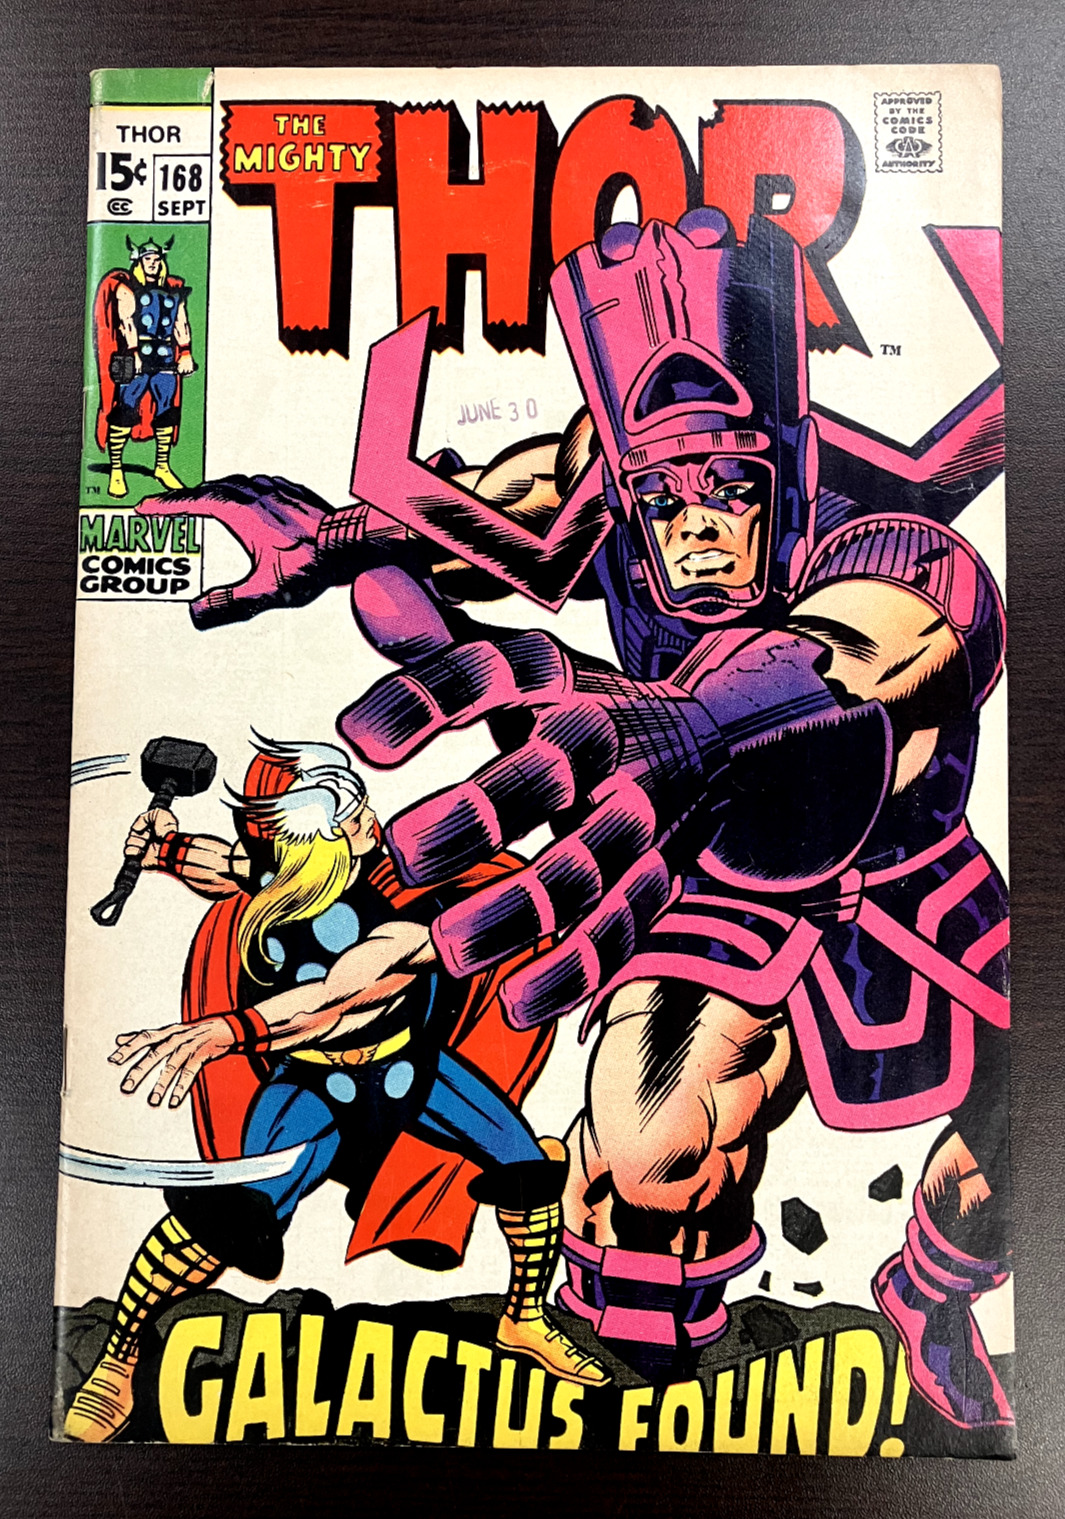 THOR #168 Stan Lee & Jack Kirby SILVER AGE CLASSIC (VG-) 1969